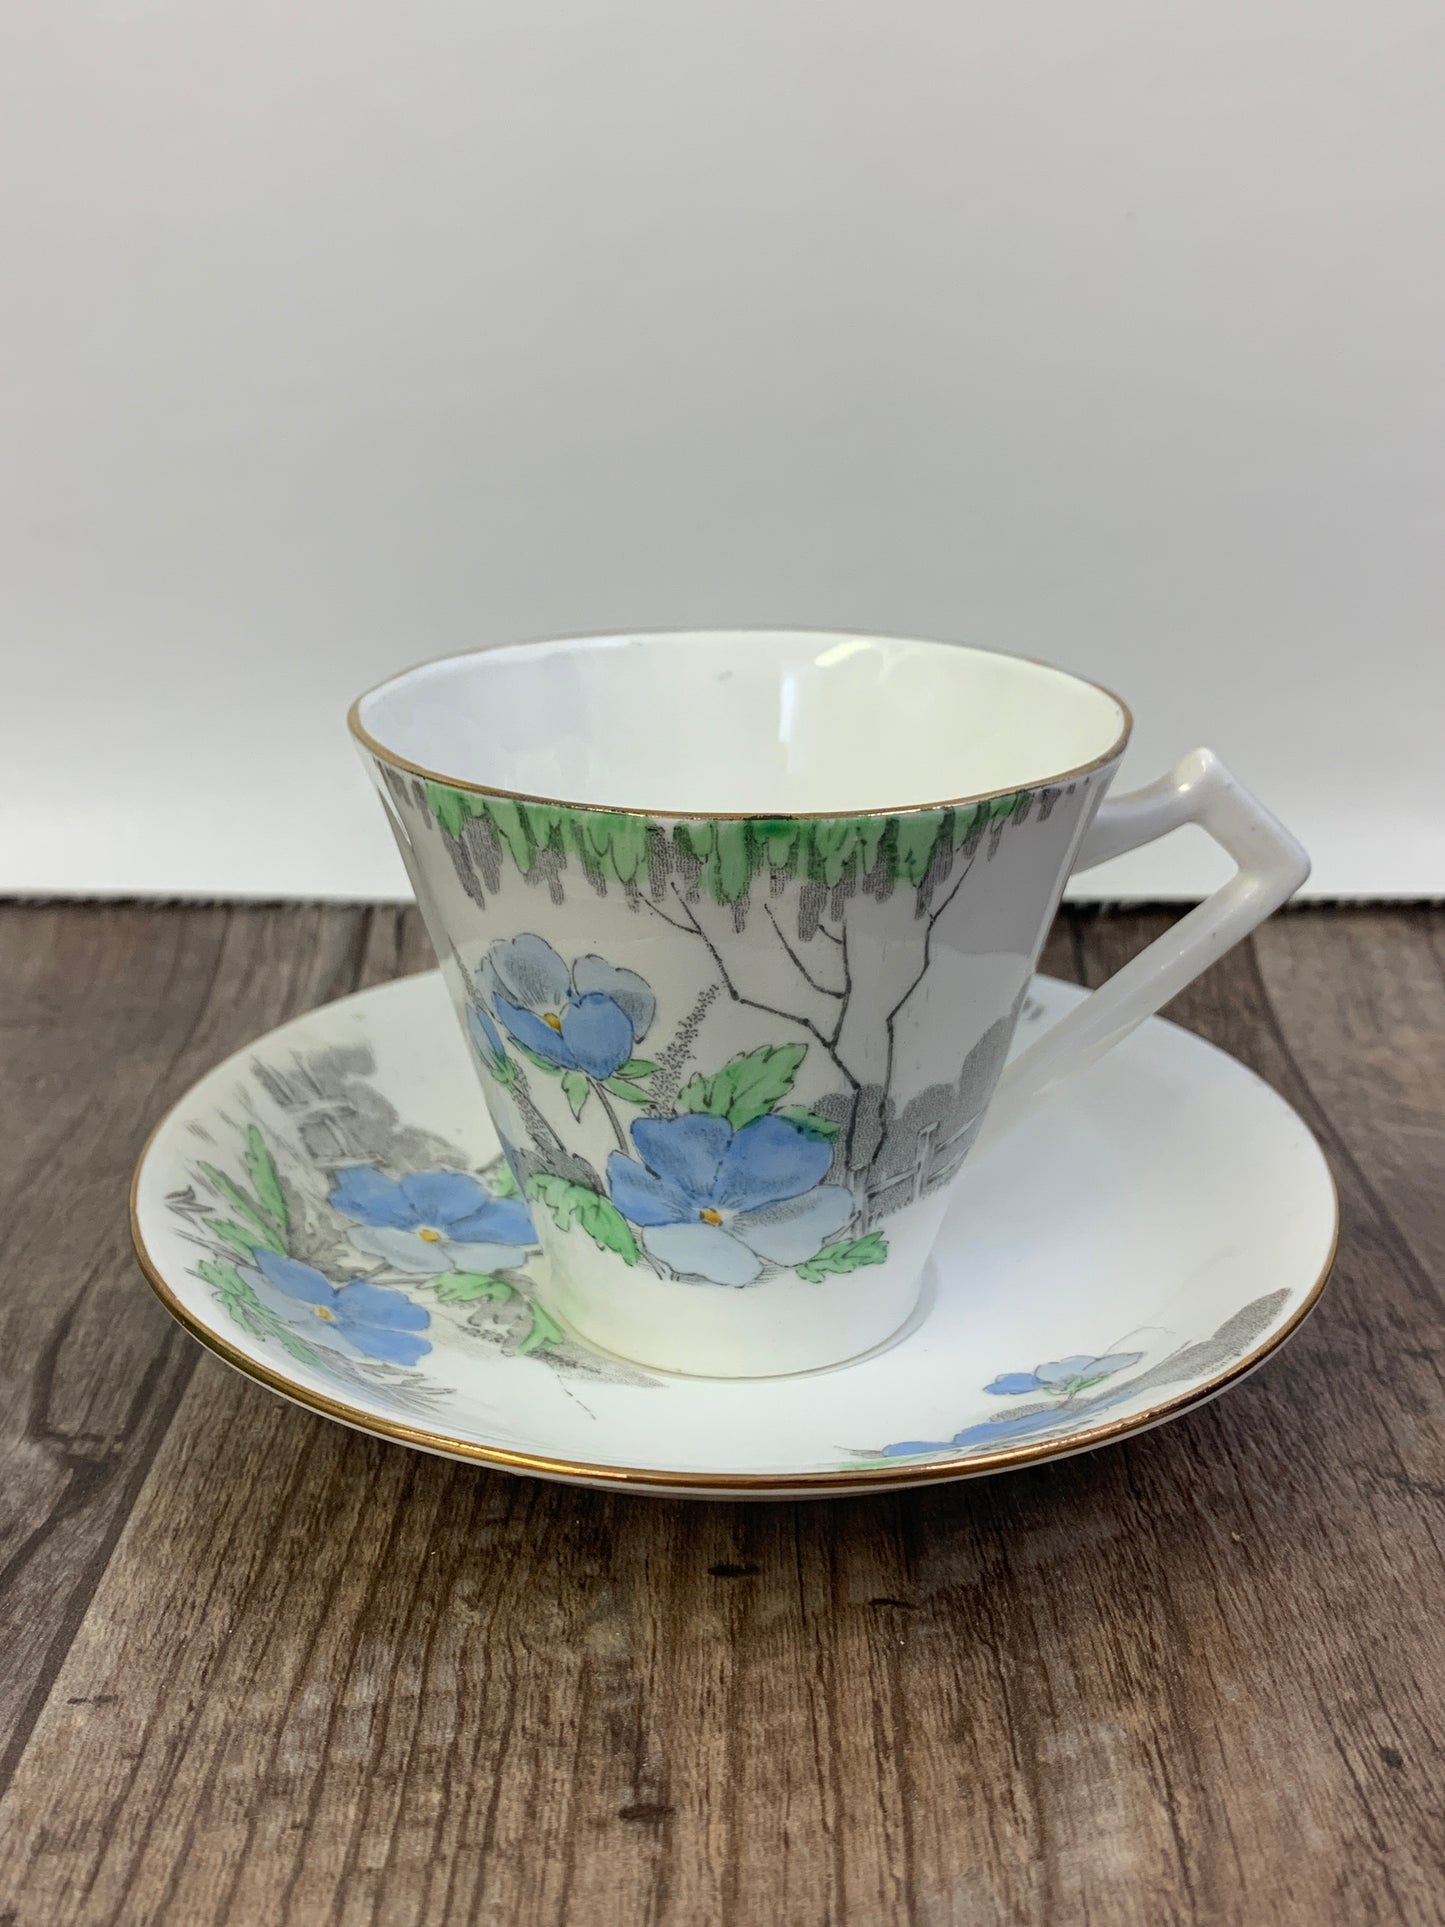 Vintage Teacup with Hand Painted Blue Green and Grey Garden Scene Royal York Fine Bone China